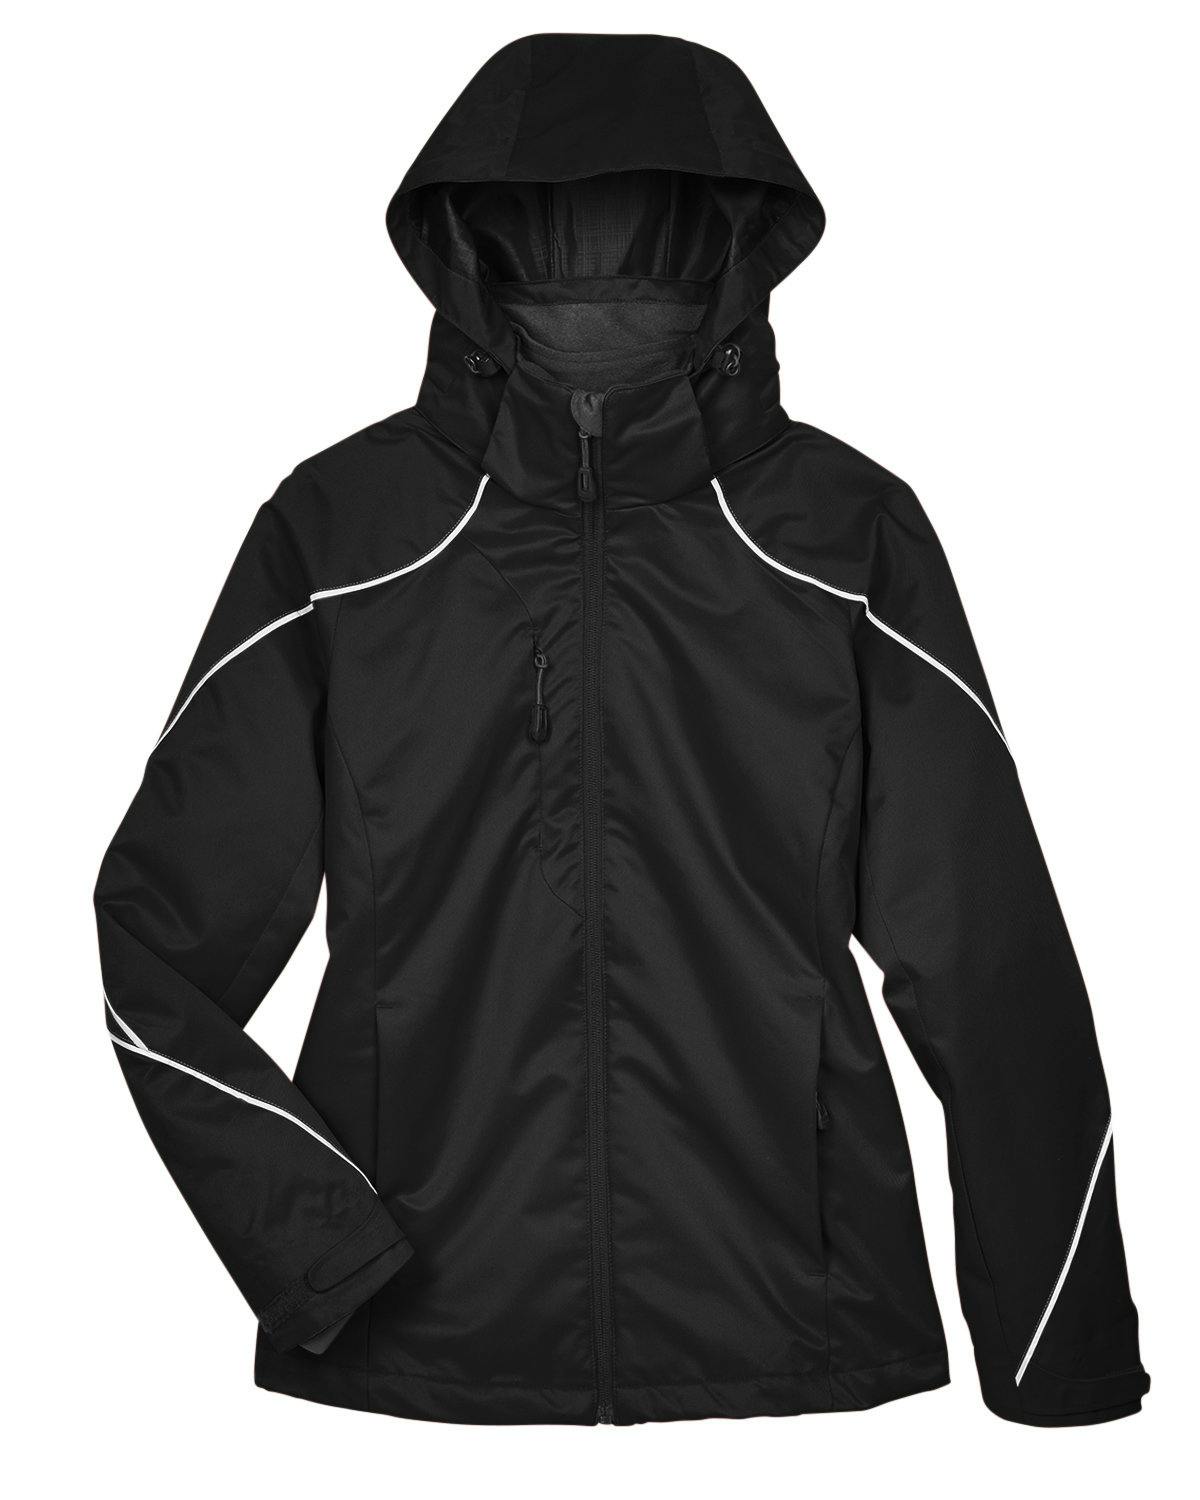 Image for Ladies' Angle 3-in-1 Jacket with Bonded Fleece Liner